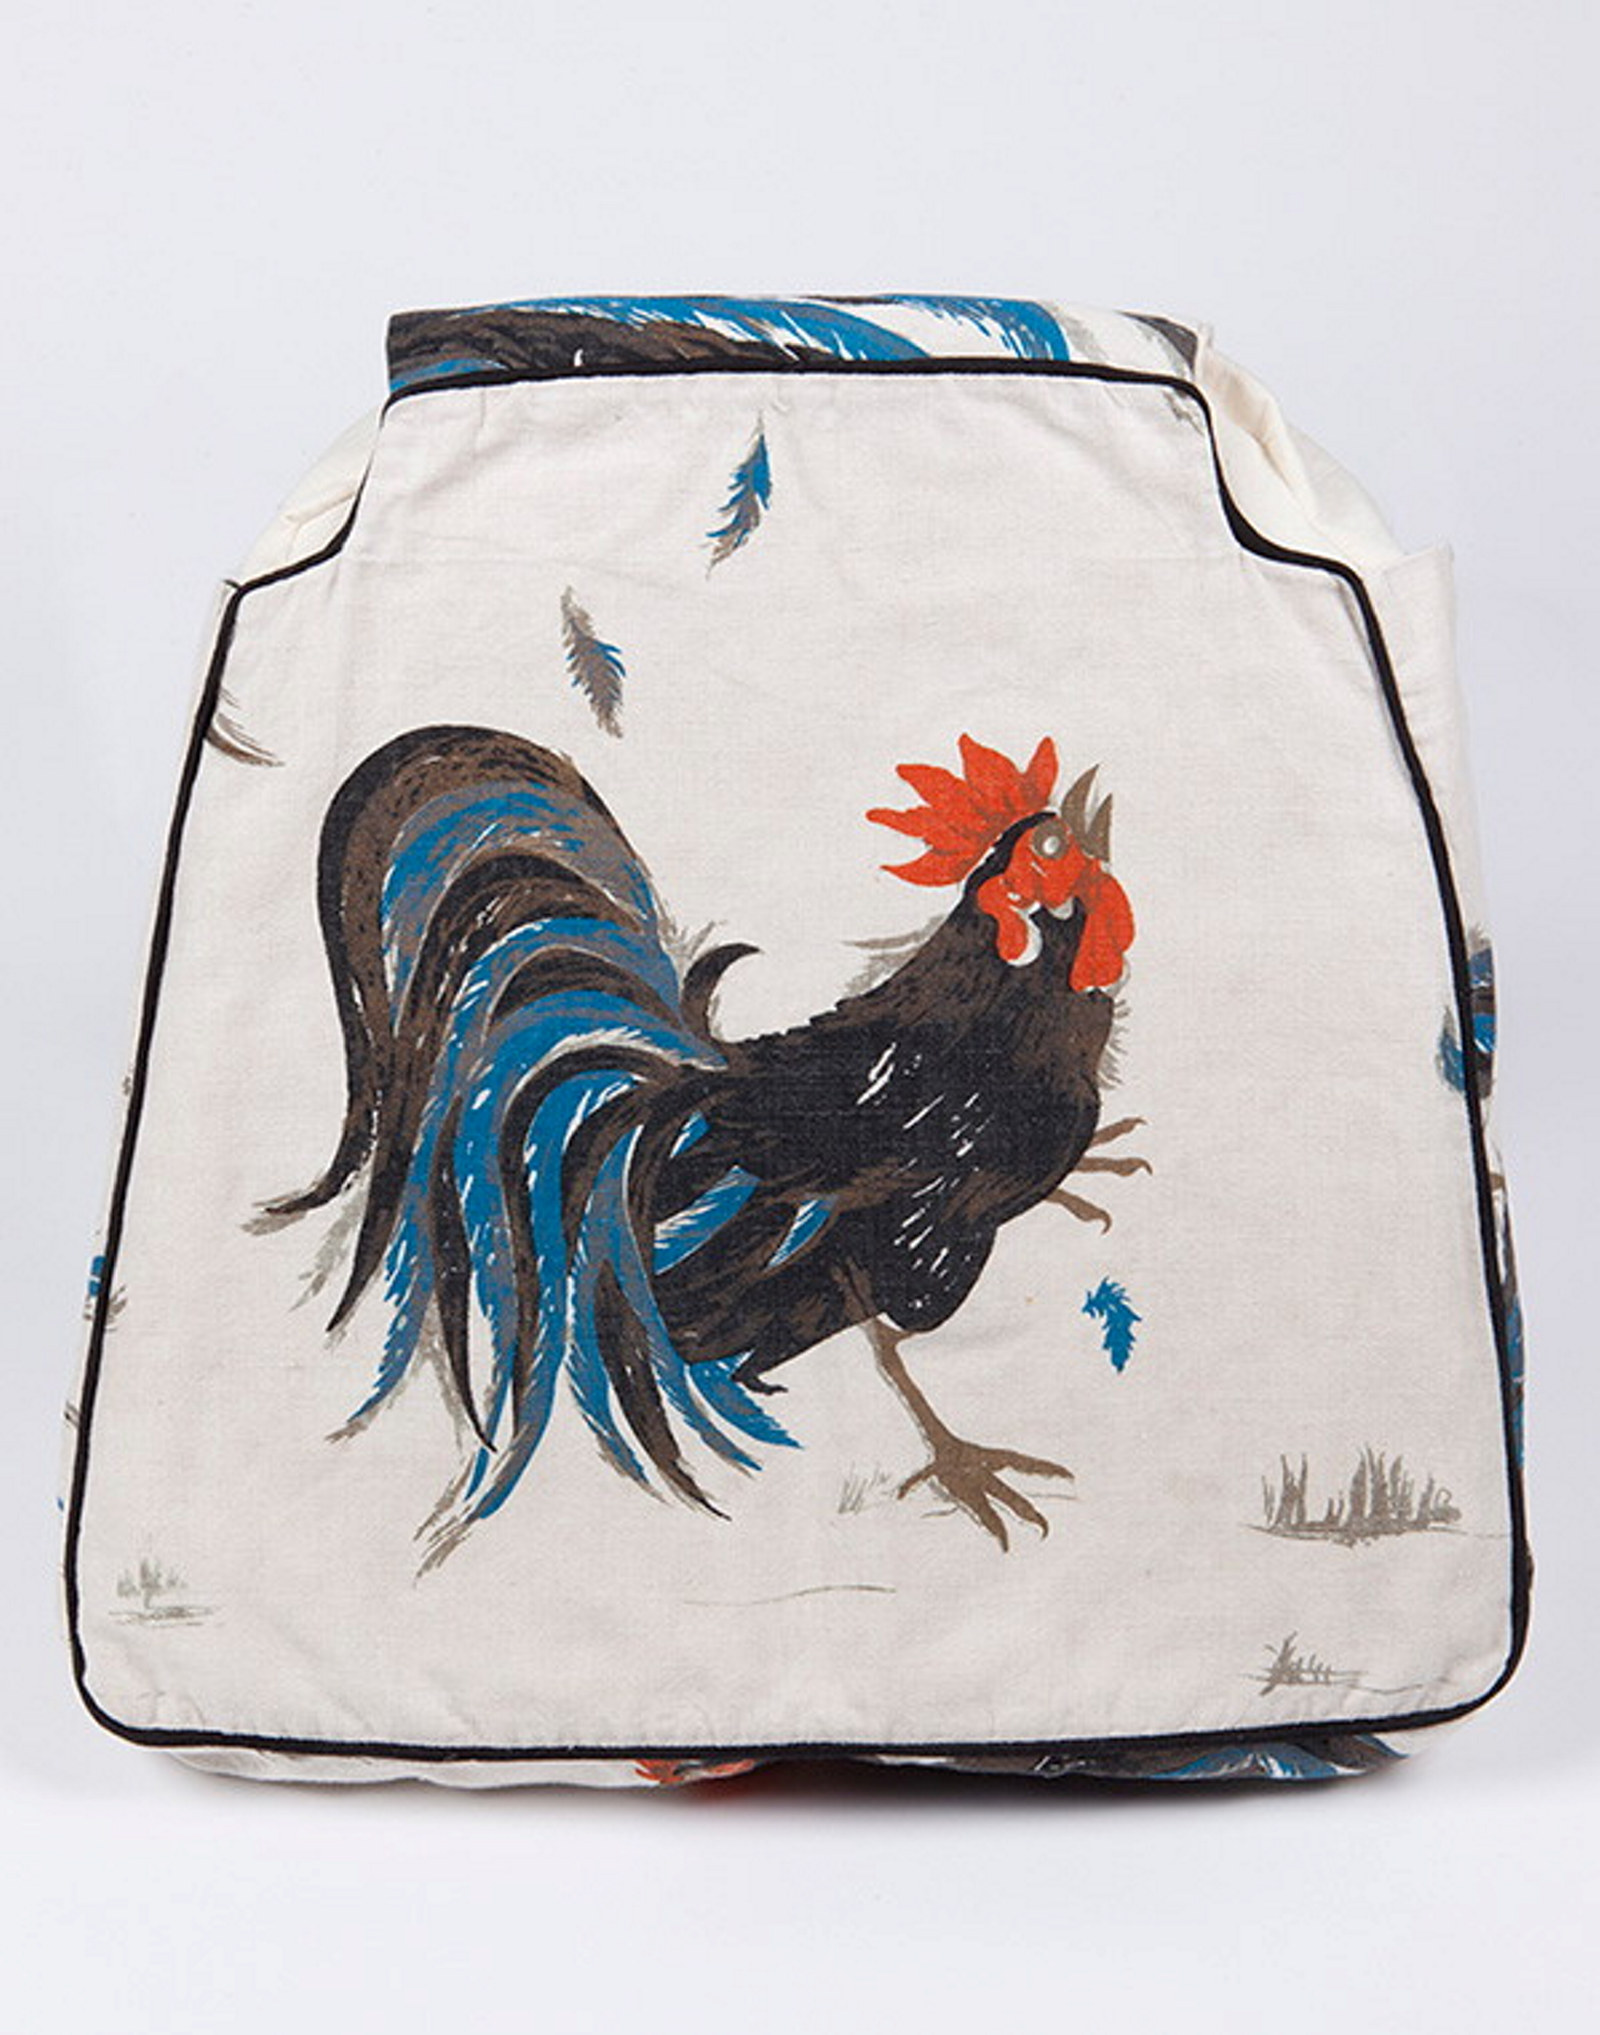 Chair cover, printed rooster motif, from the Robert Lloyd collection